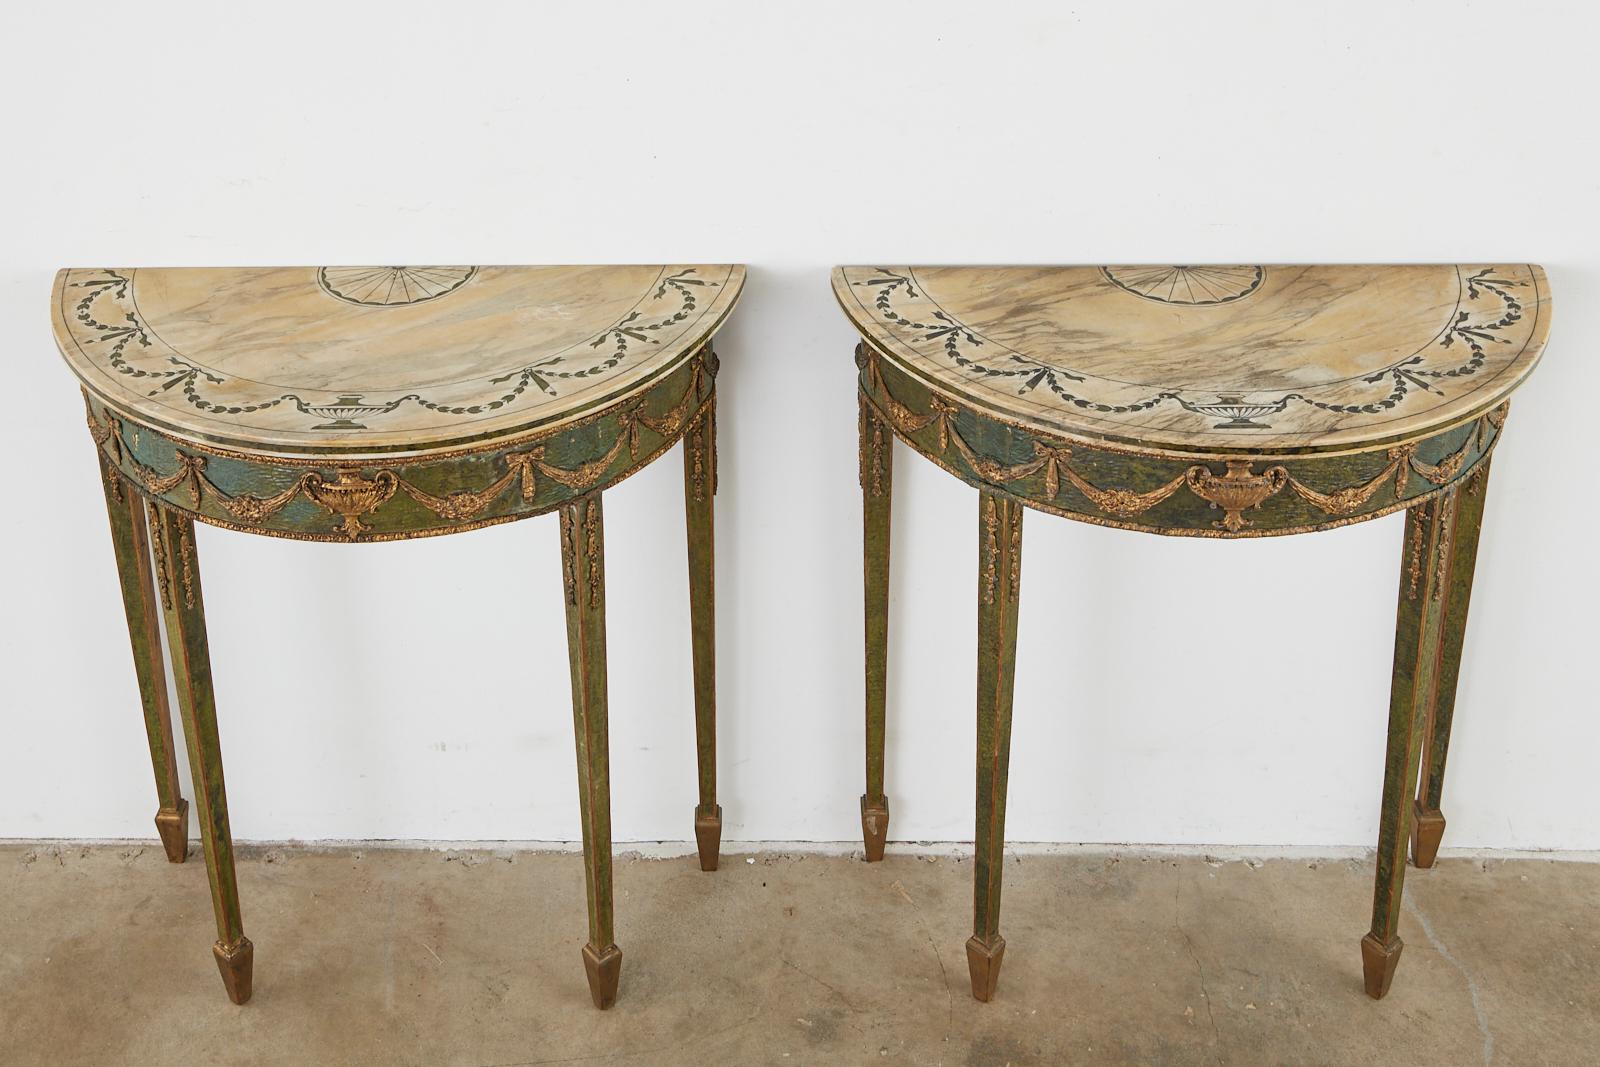 Hand-Crafted 18th Century English Adams Demilune Consoles with Scagliola Marble Tops